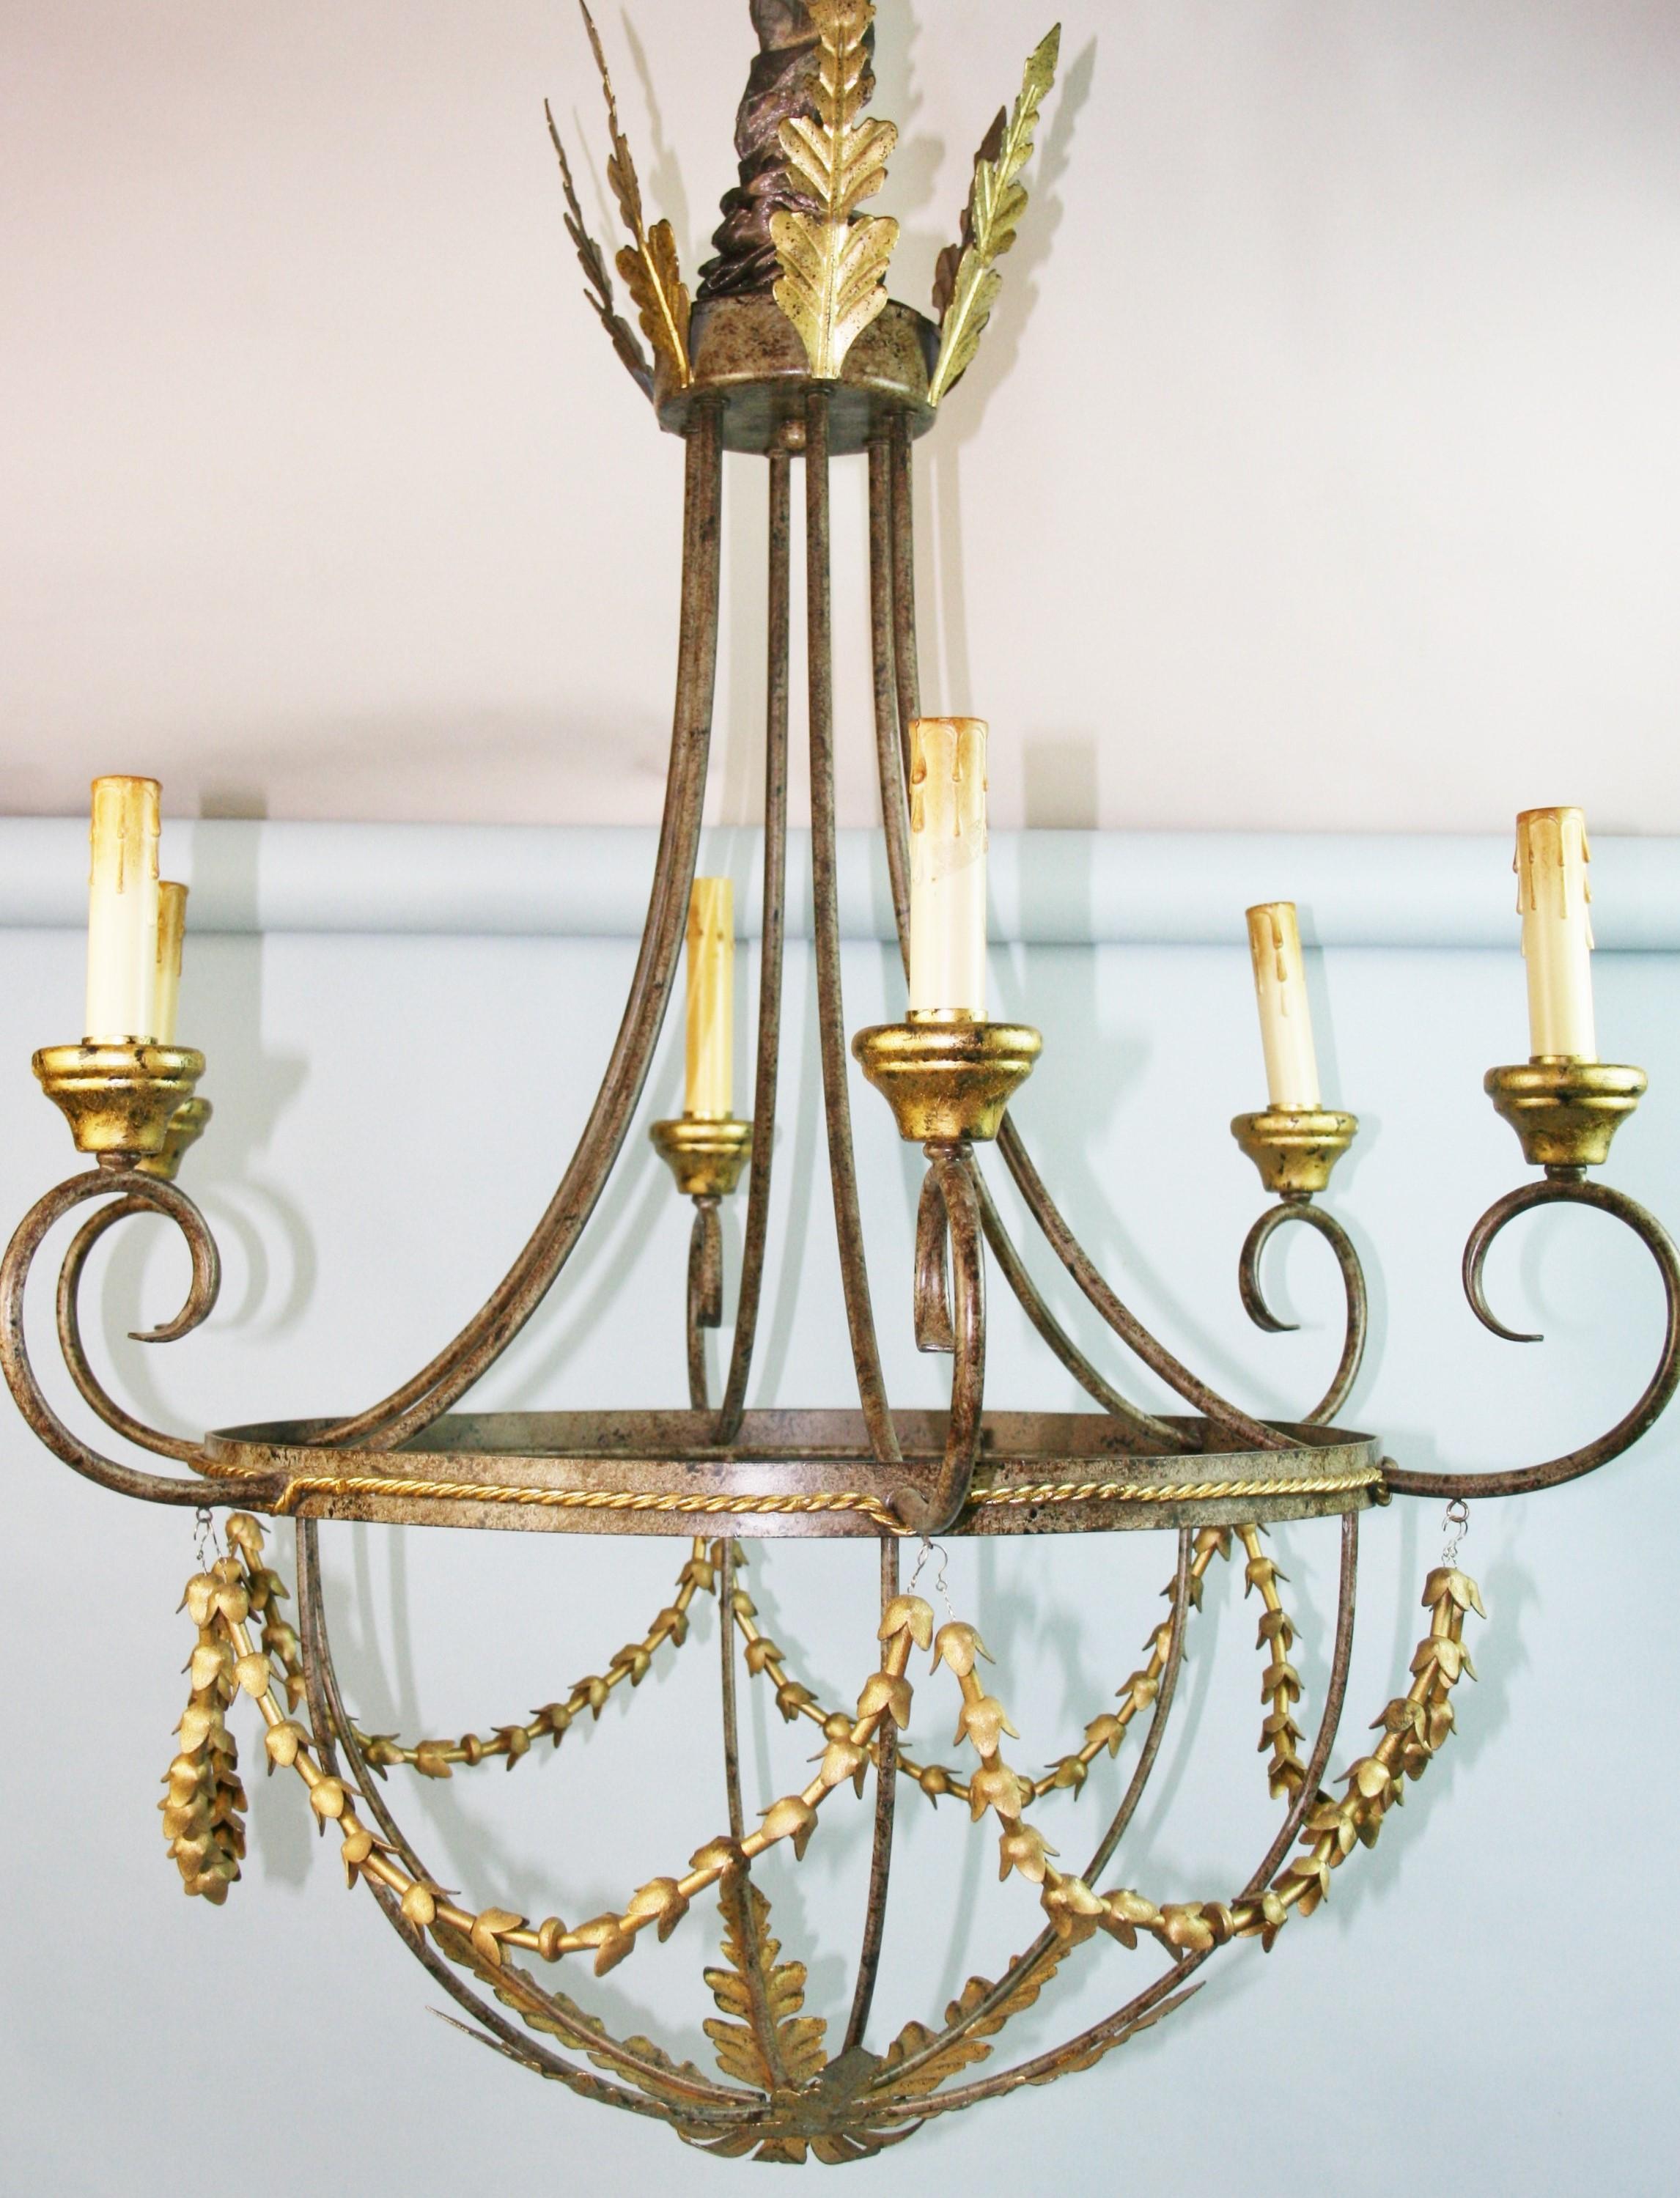 1486 Italian 6 light metal and wood chandelier with fine details
Supplied with 2 feet chain and canopy